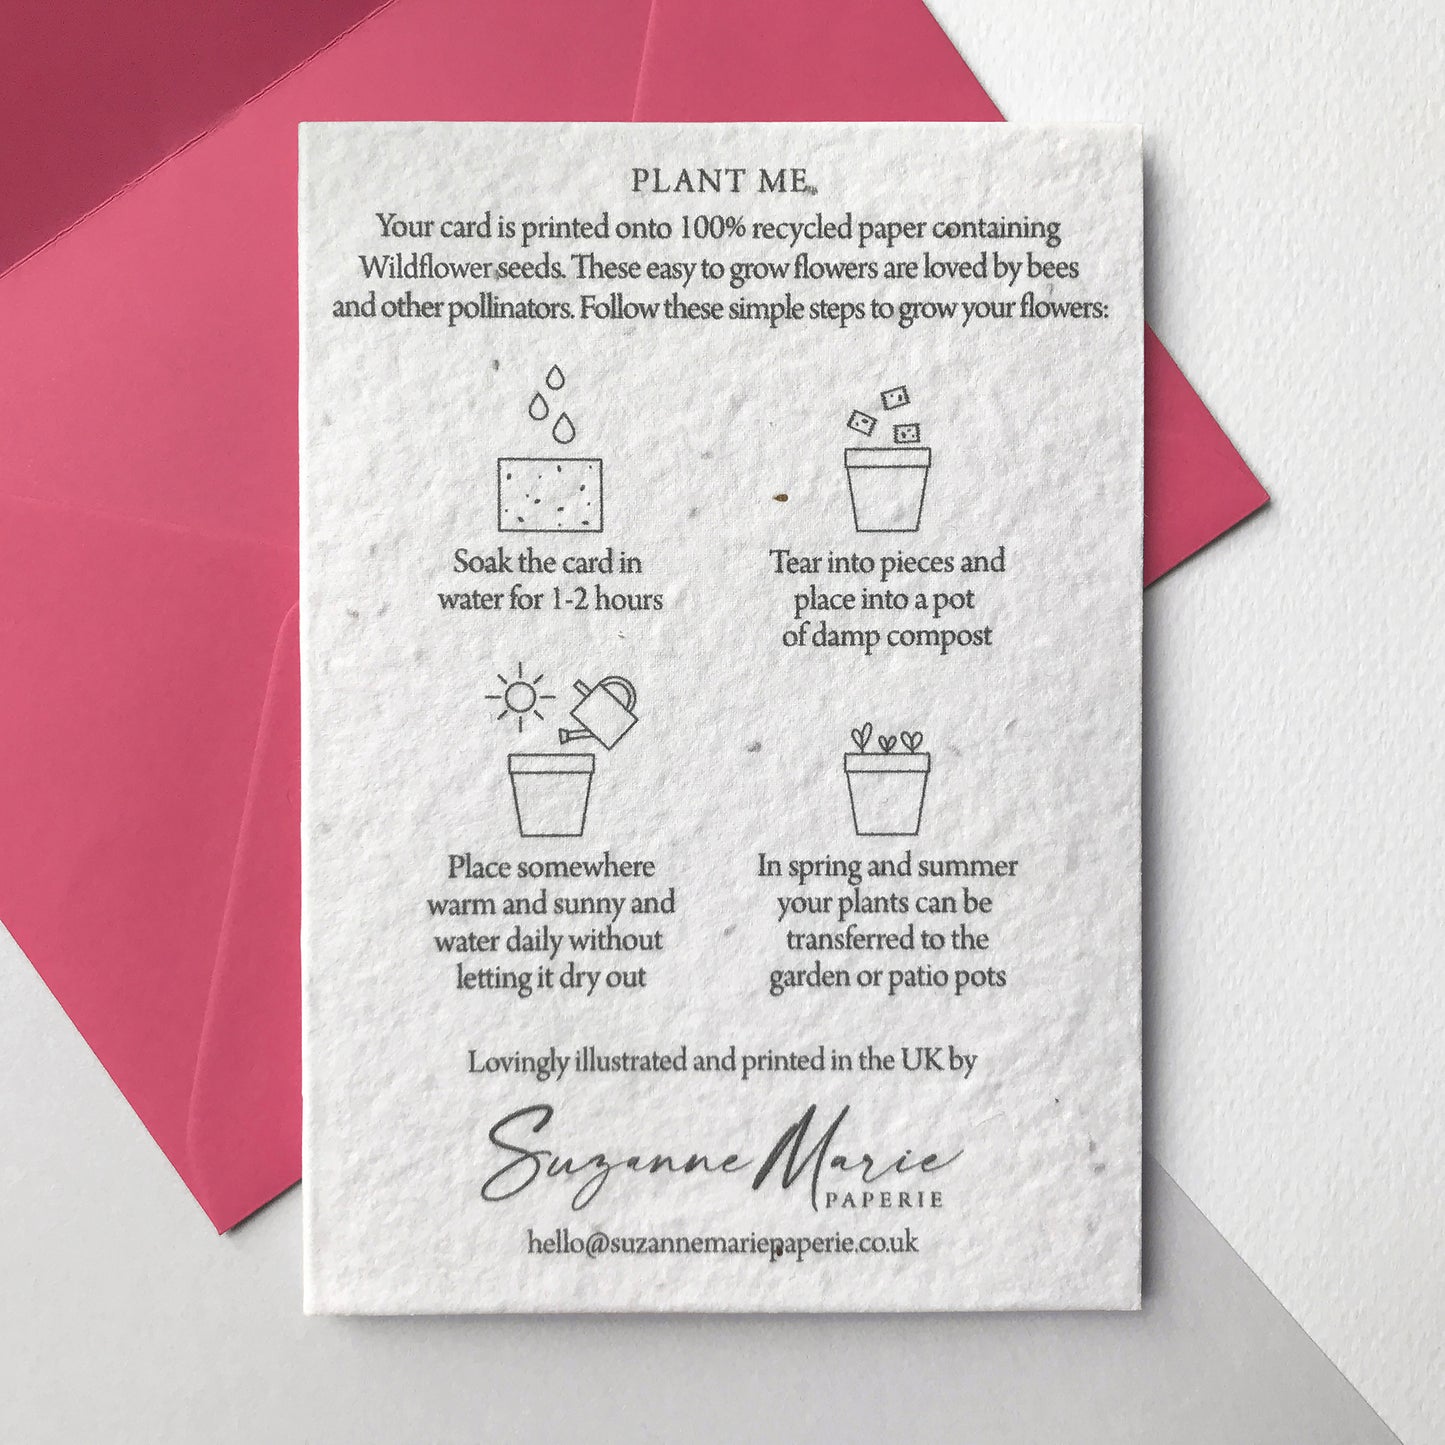 Image shows the back of the plantable seed paper anniversary card featuring easy to follow planting instructions by Suzanne Marie Paperie.